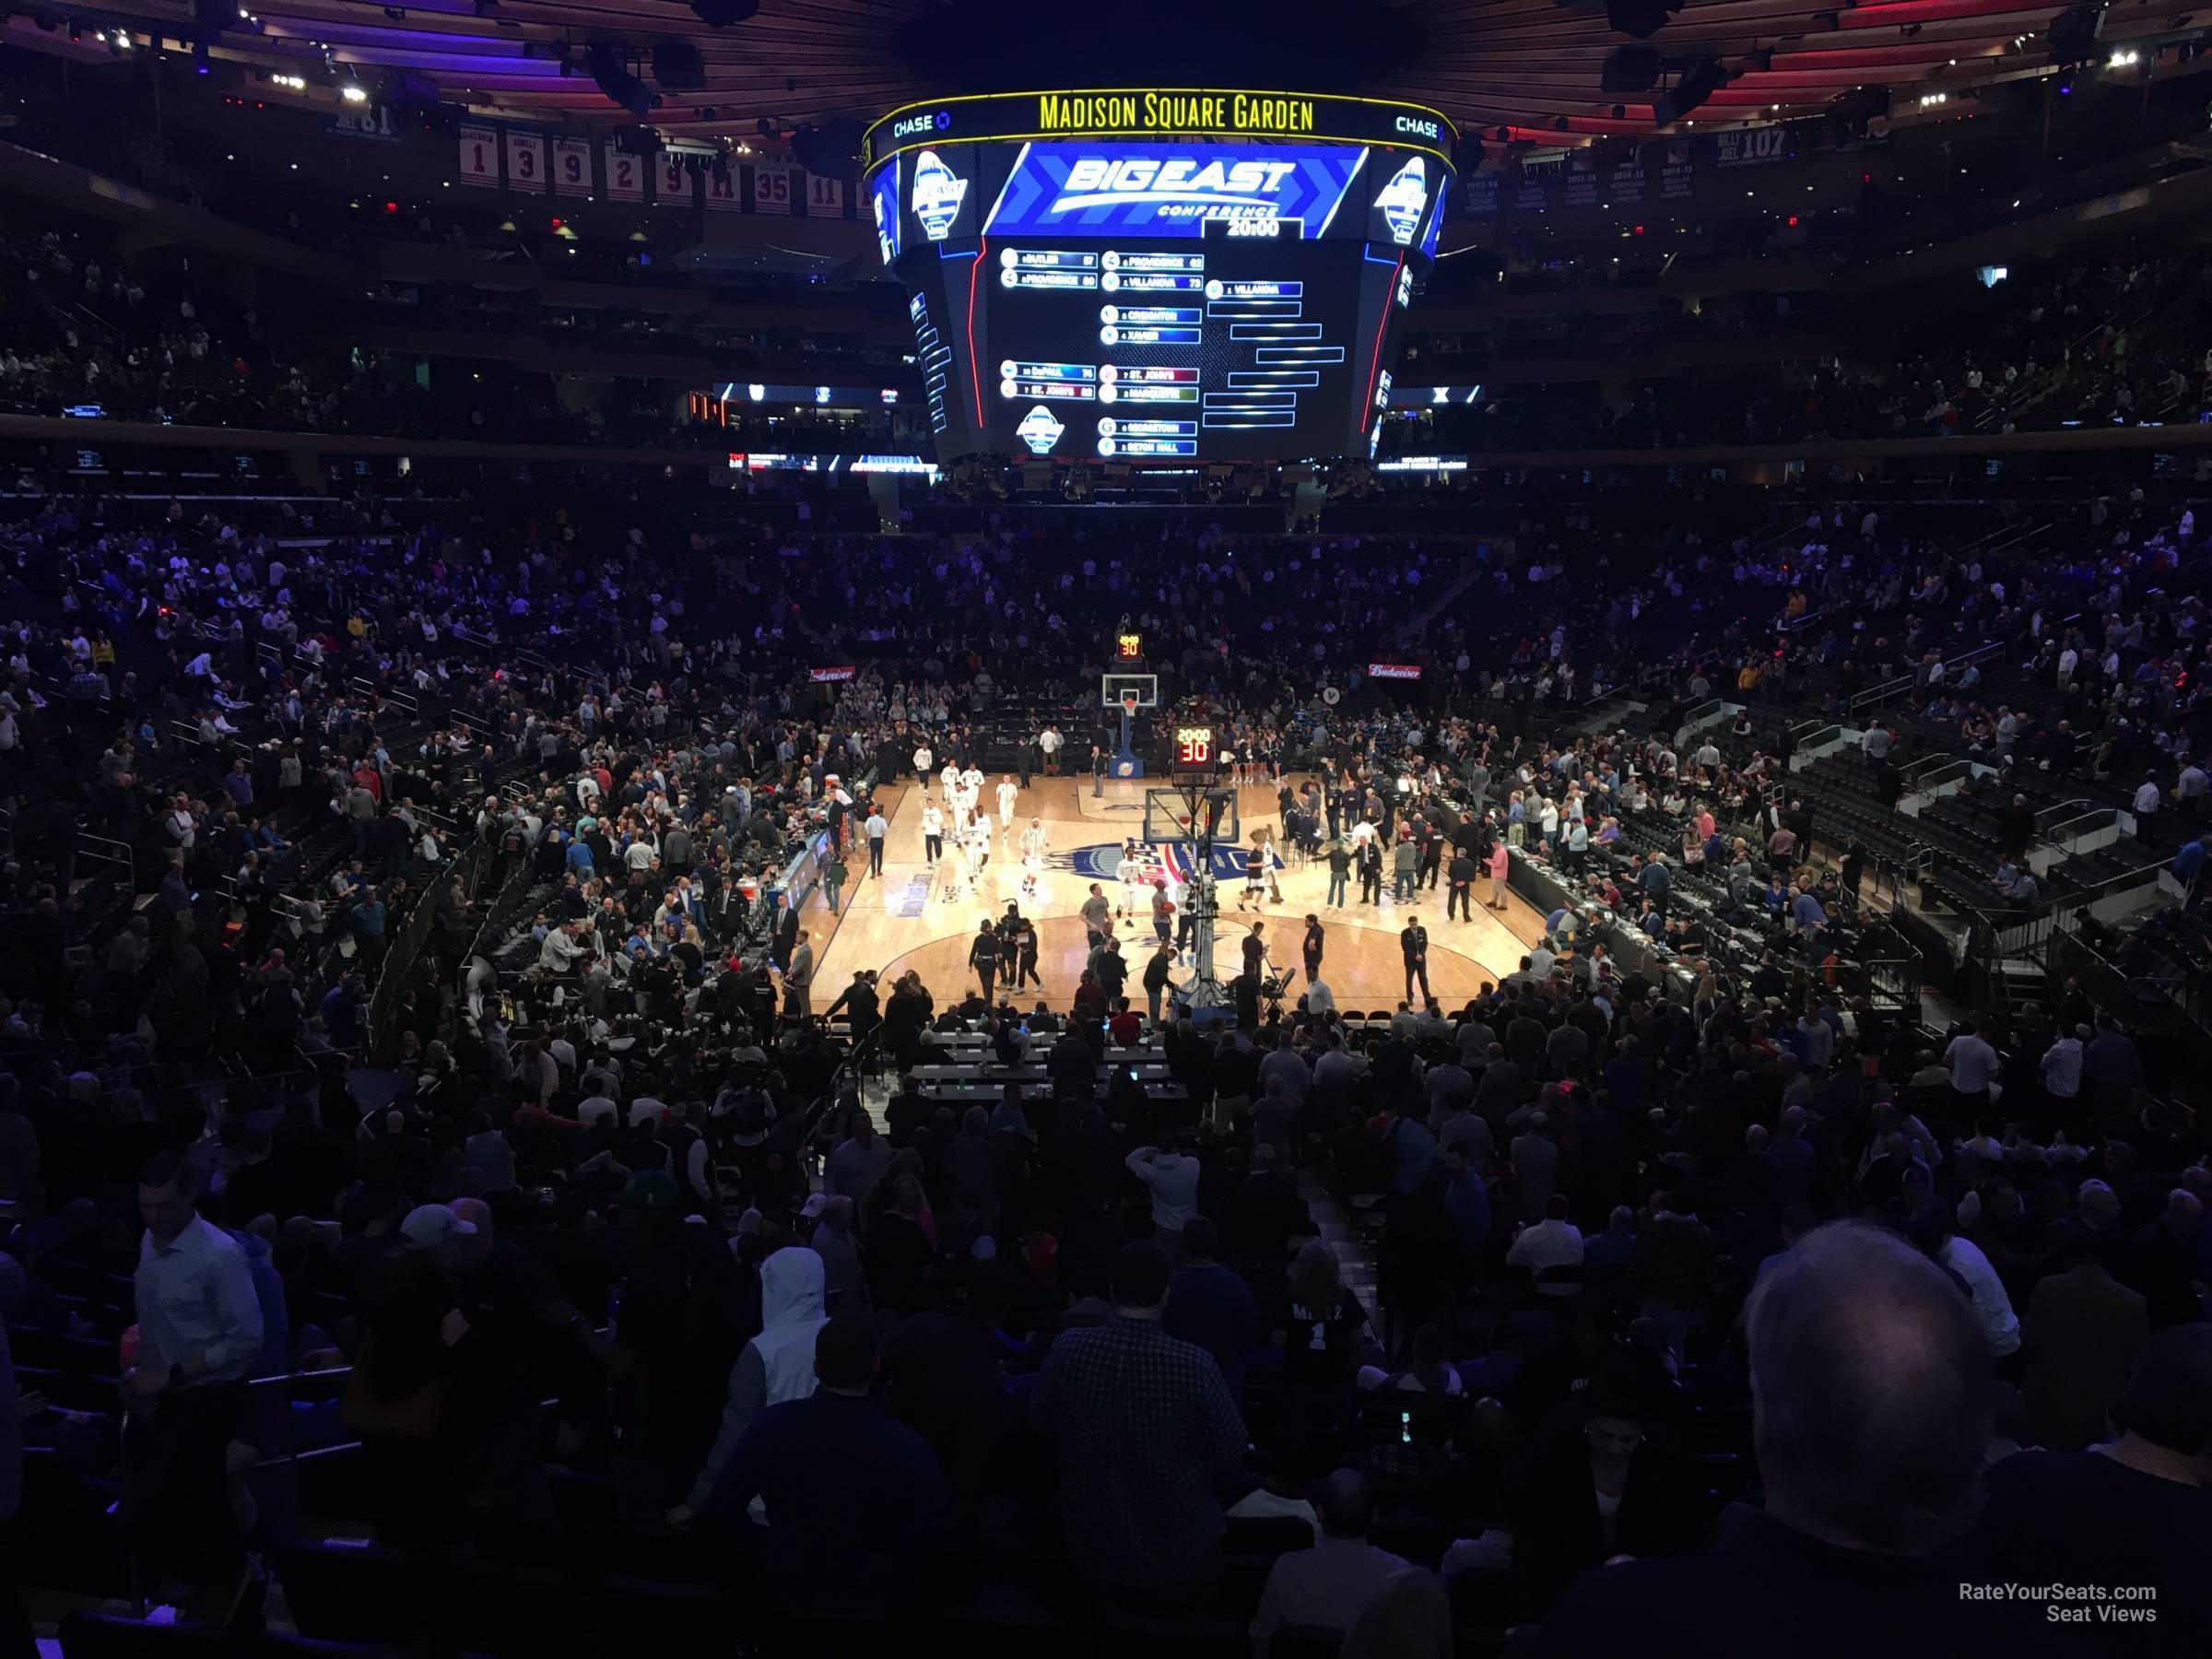 madison club 62, row 1 seat view  for basketball - madison square garden